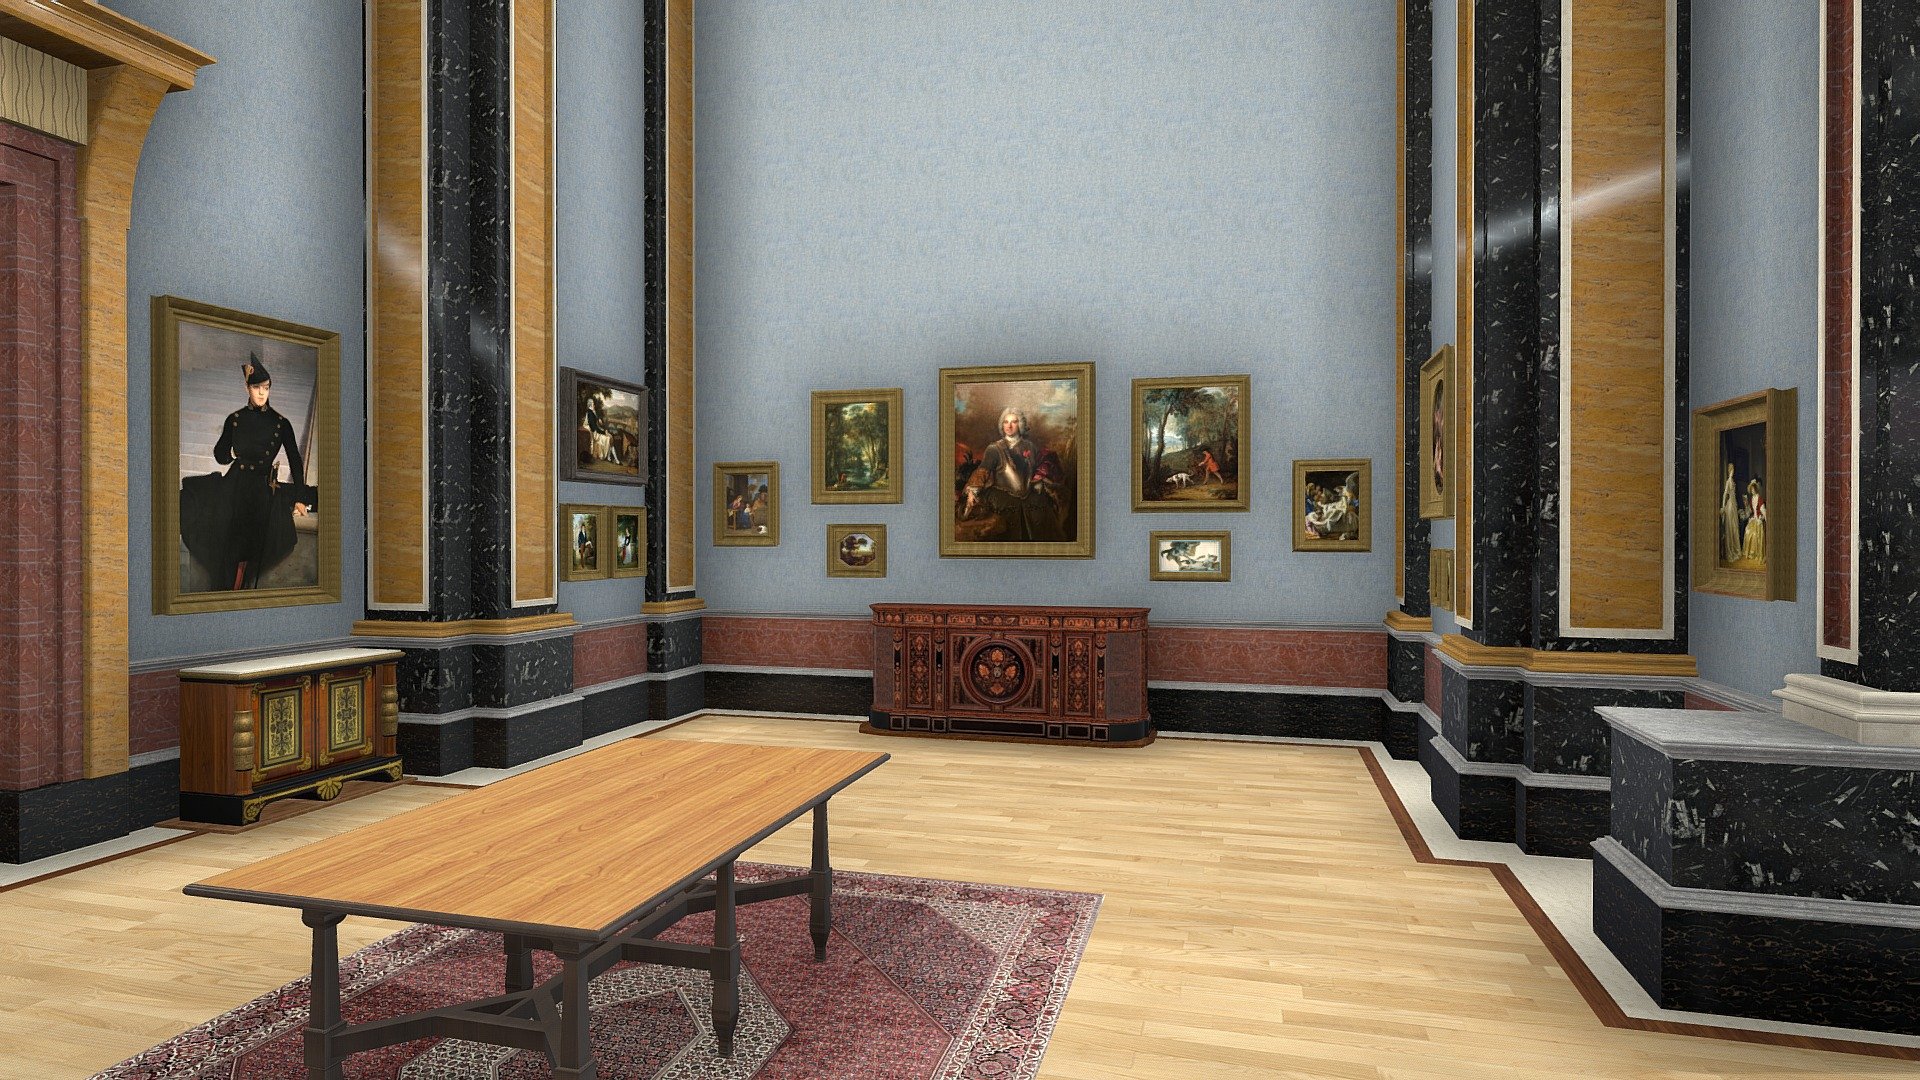 Gallery 4: French Art 17th–19th Century
This gallery is current closed for refurbishment.

All galleries are subject to change and may not be accurate in comparison to a visit in the future.
Created using SketchUp Pro 2020, nothing in this model is scanned 3d model